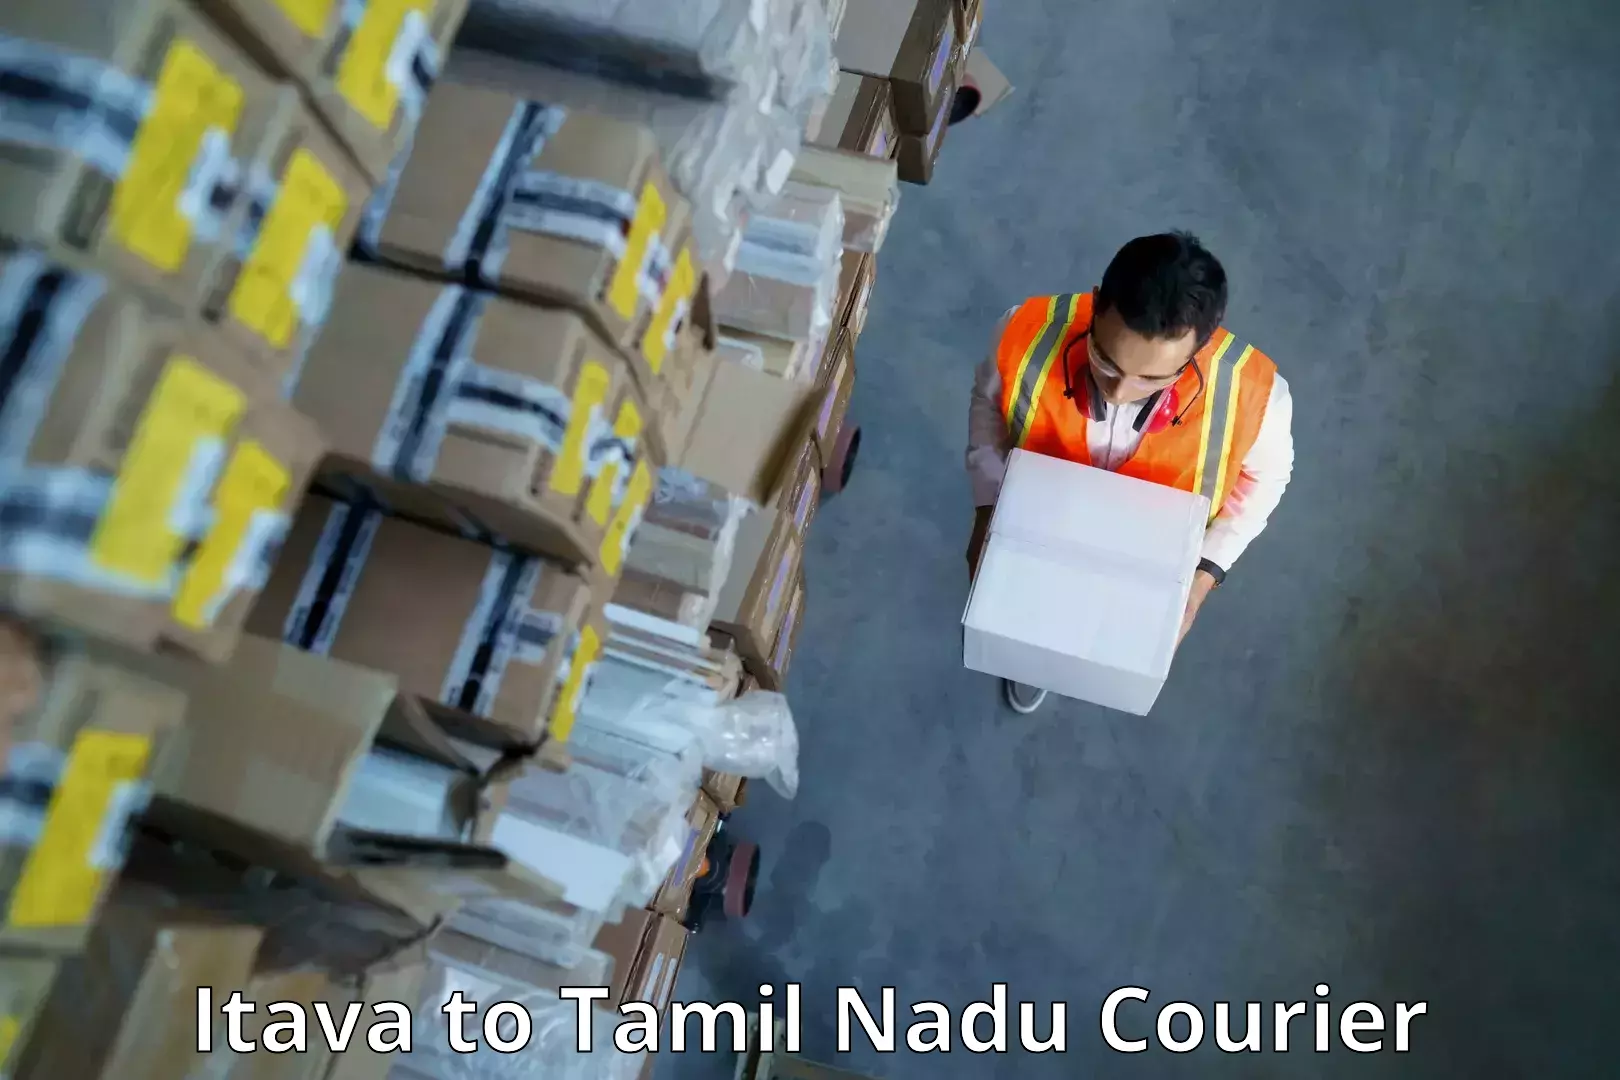 On-call courier service Itava to Gobichettipalayam